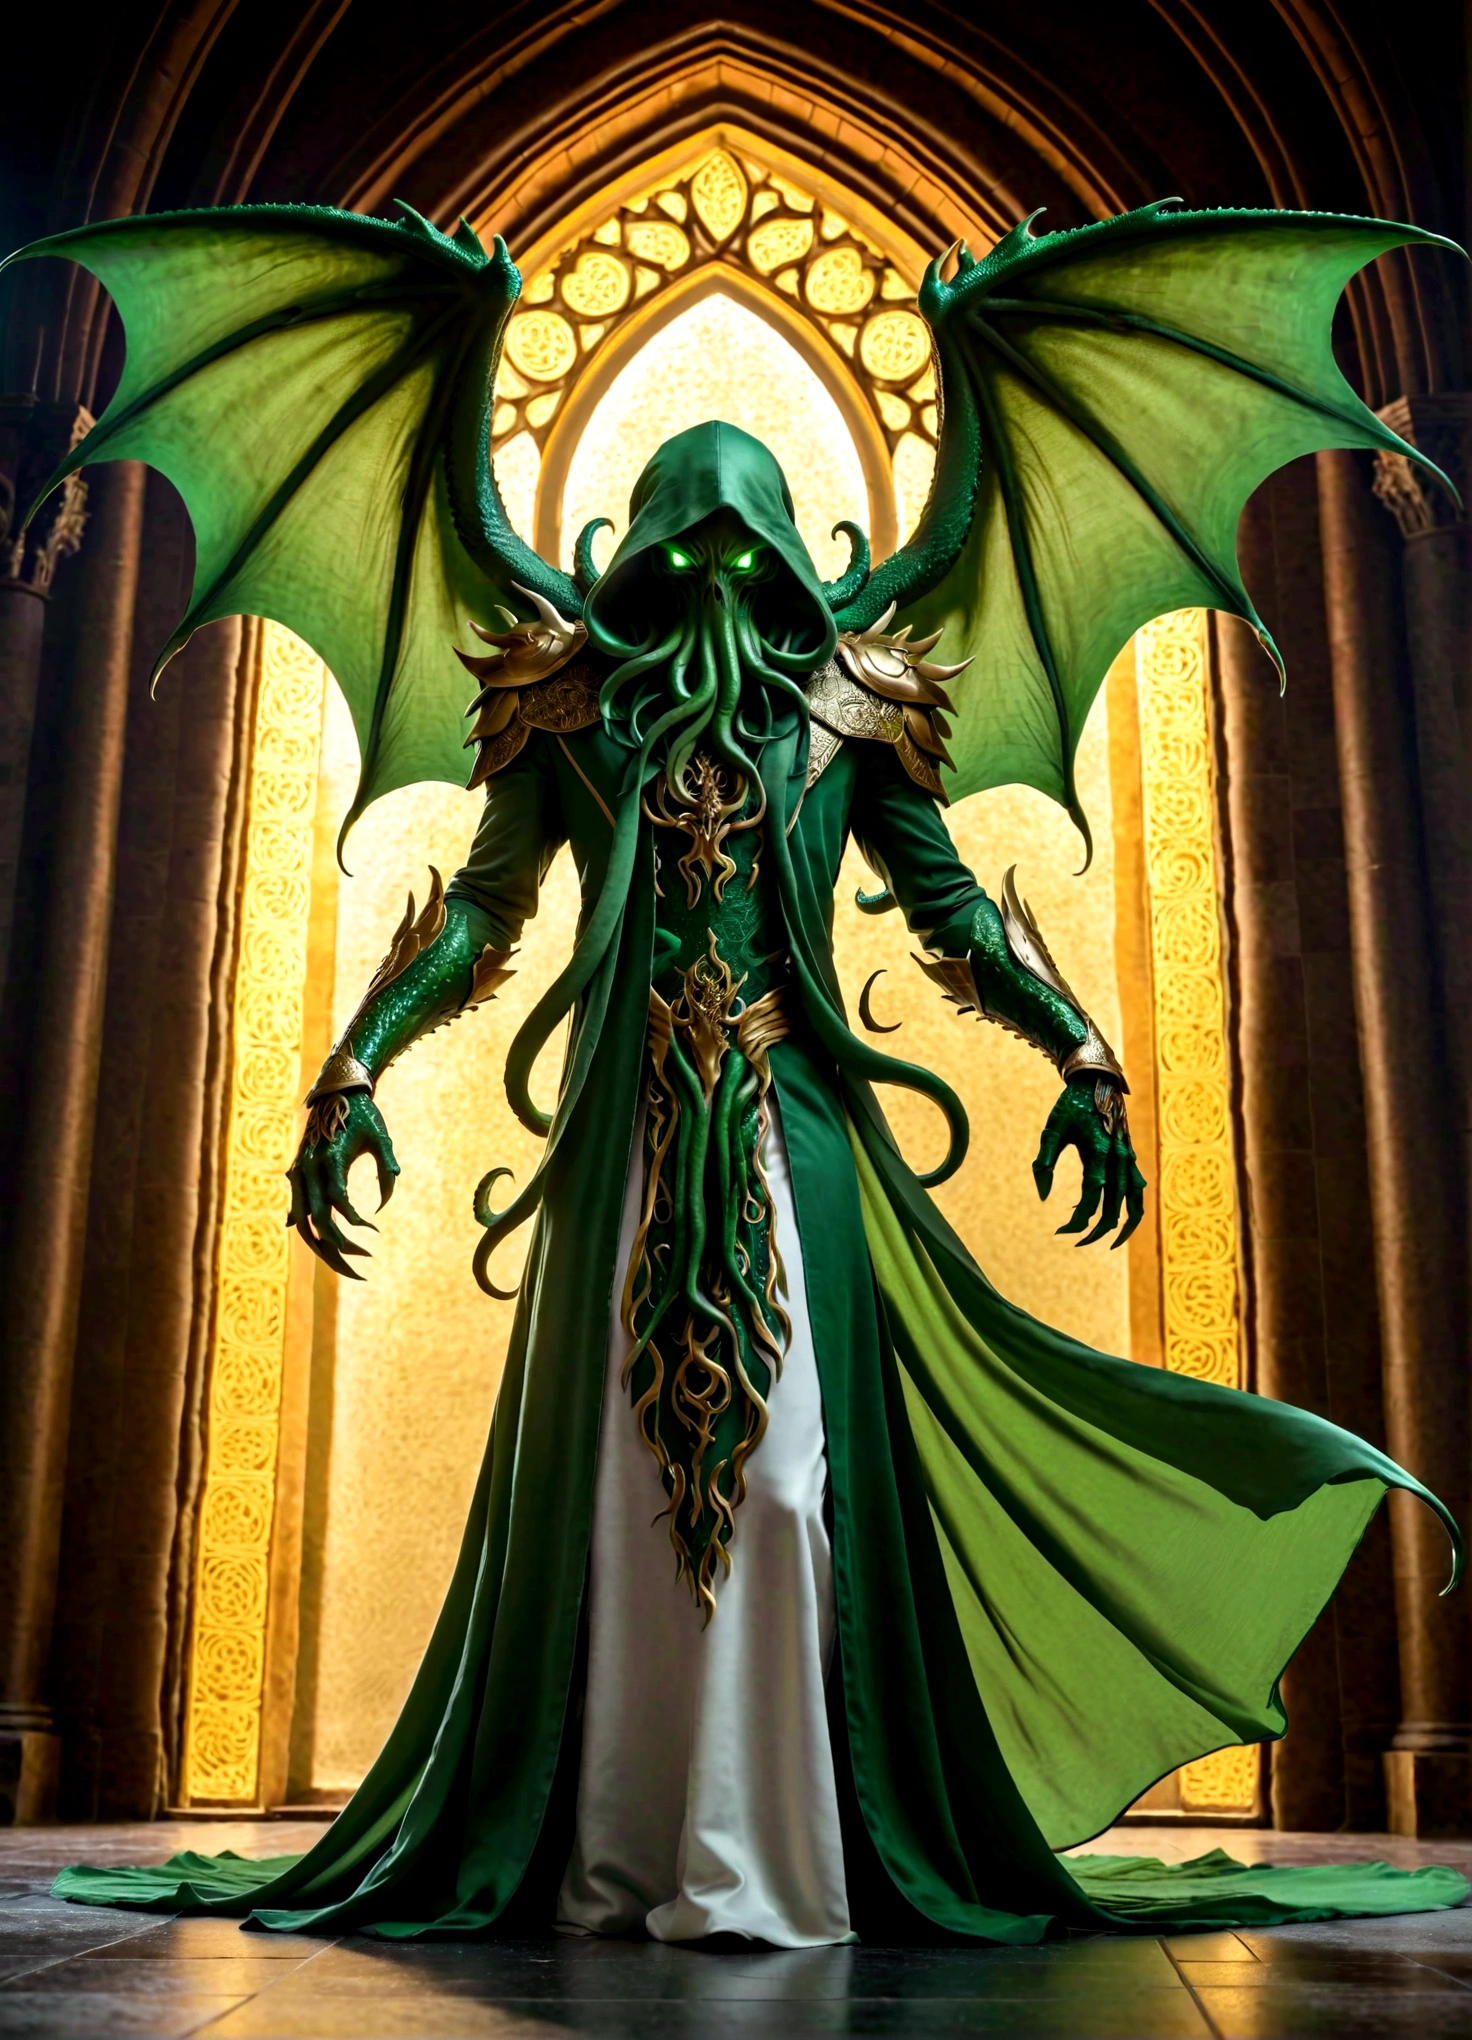 masterpiece, best quality, Practical, Cthulhu Emissary, Solitary, In a high-end church, Green Skin, (paw), The silhouette of huge wings, detailed tentacles, The Eye of Fear，Gold and white clothes, Long scarf, flow, Light Armor, whole body, (from below), flame, particle